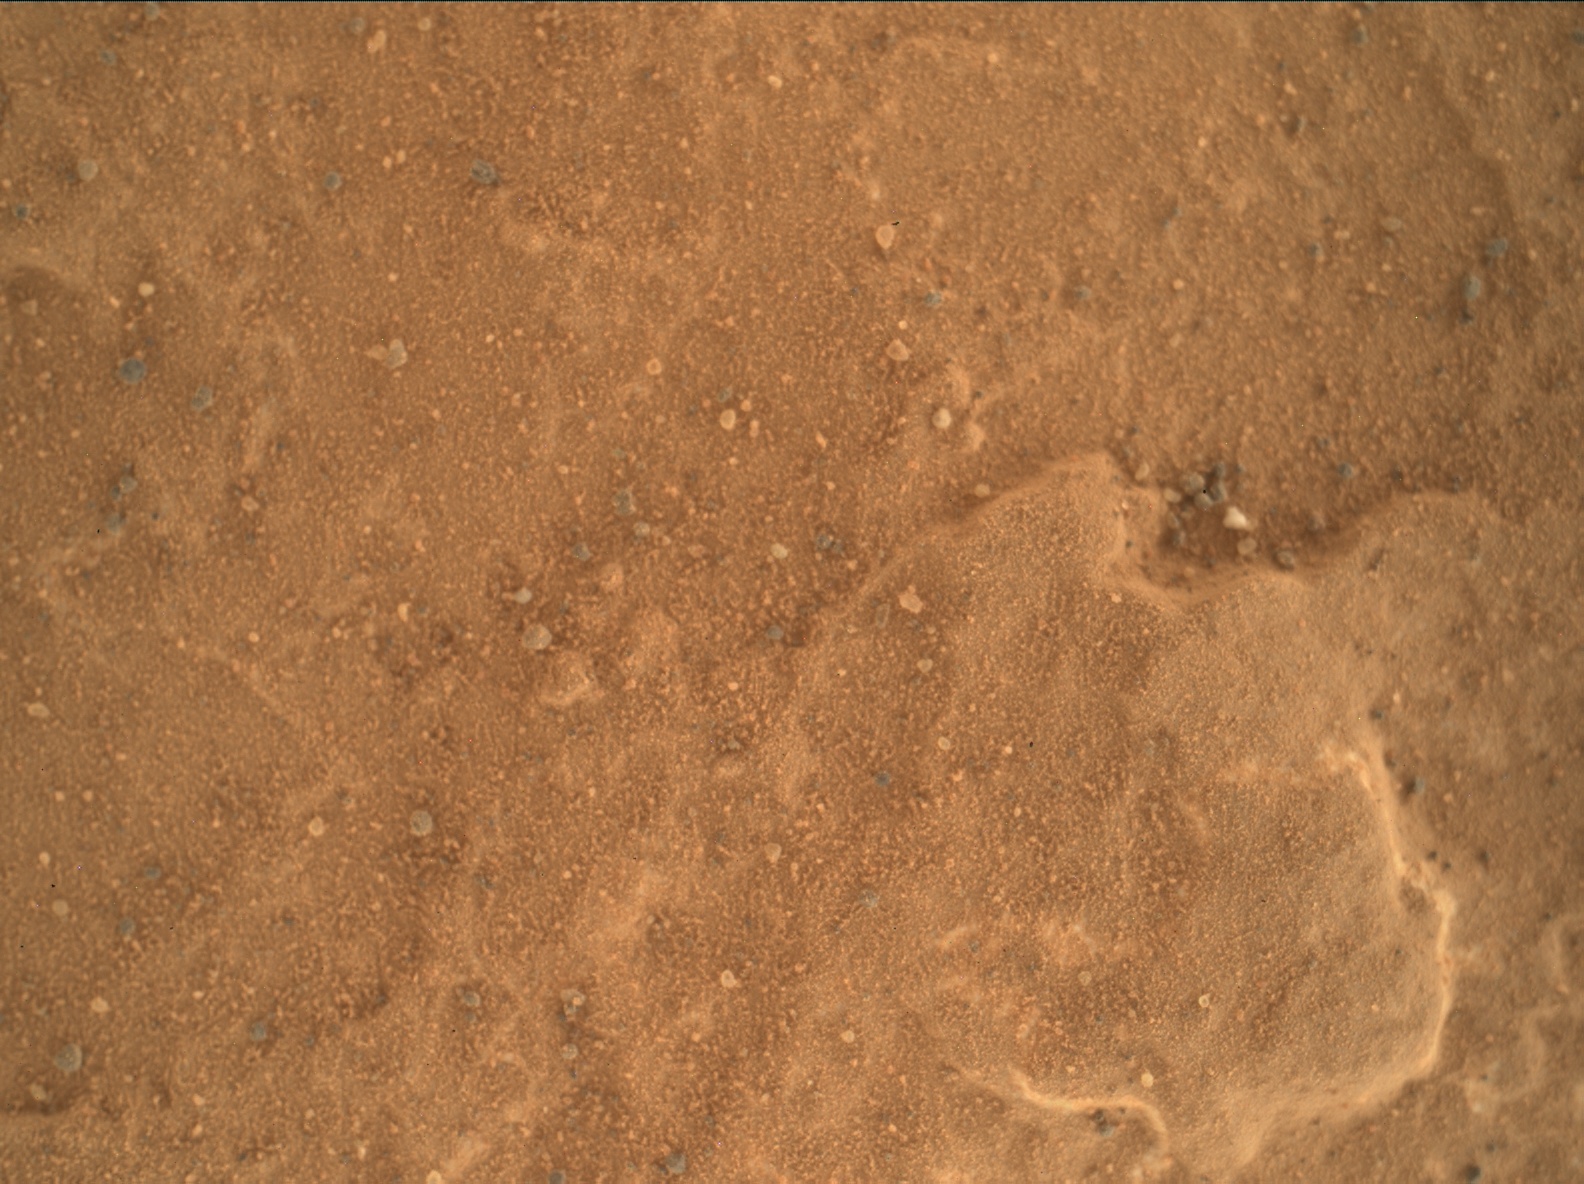 Nasa's Mars rover Curiosity acquired this image using its Mars Hand Lens Imager (MAHLI) on Sol 1796